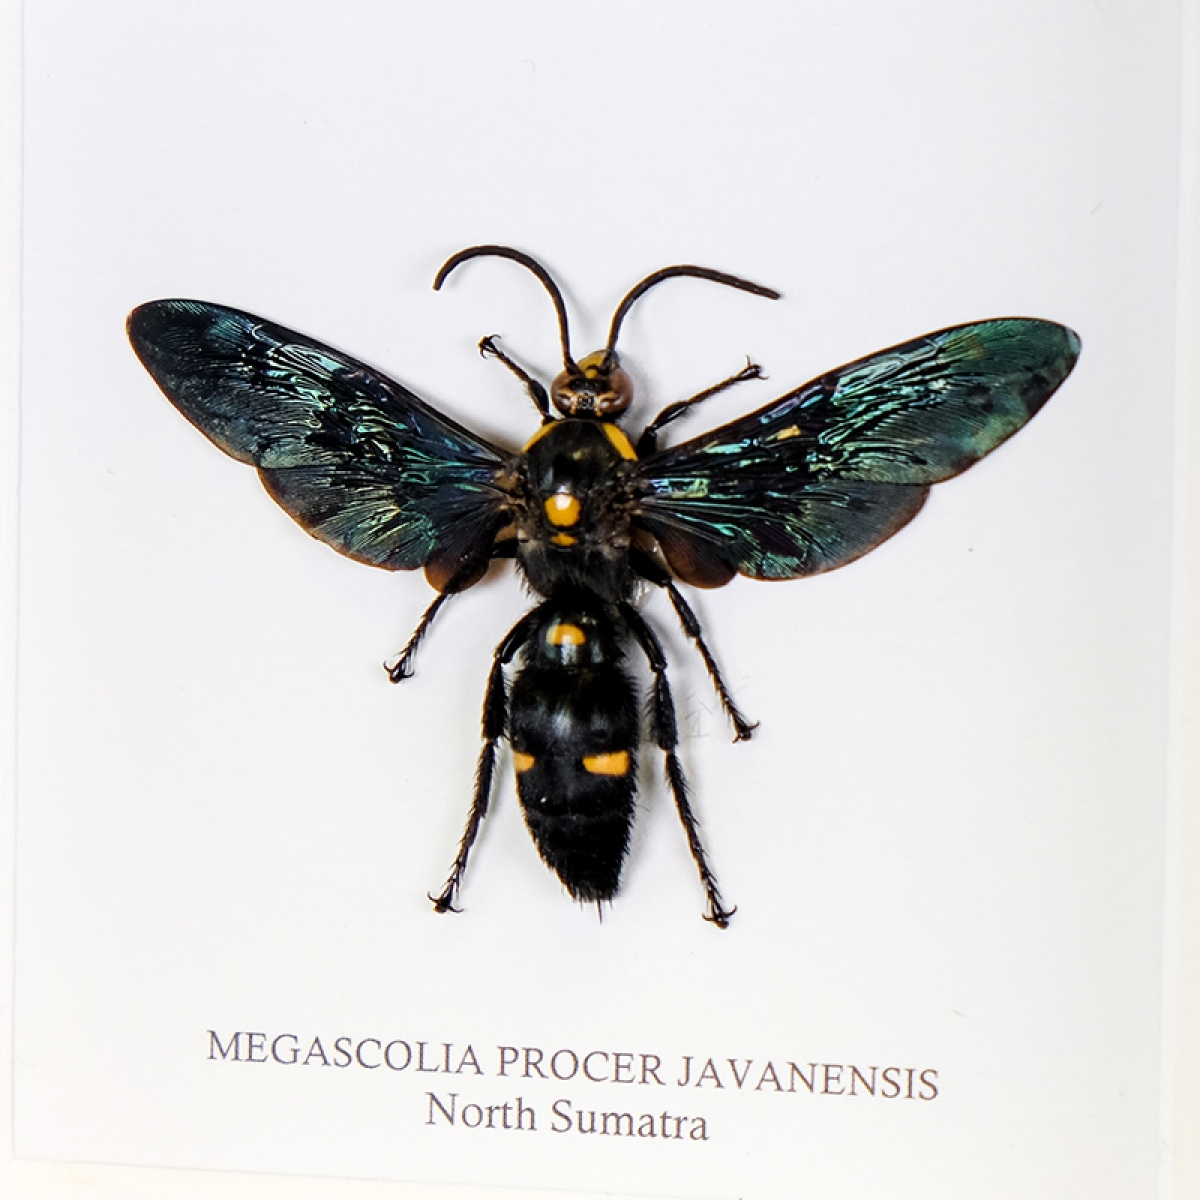 Giant Scoliid Wasp in Box Frame (Megascolia procer javanesis)